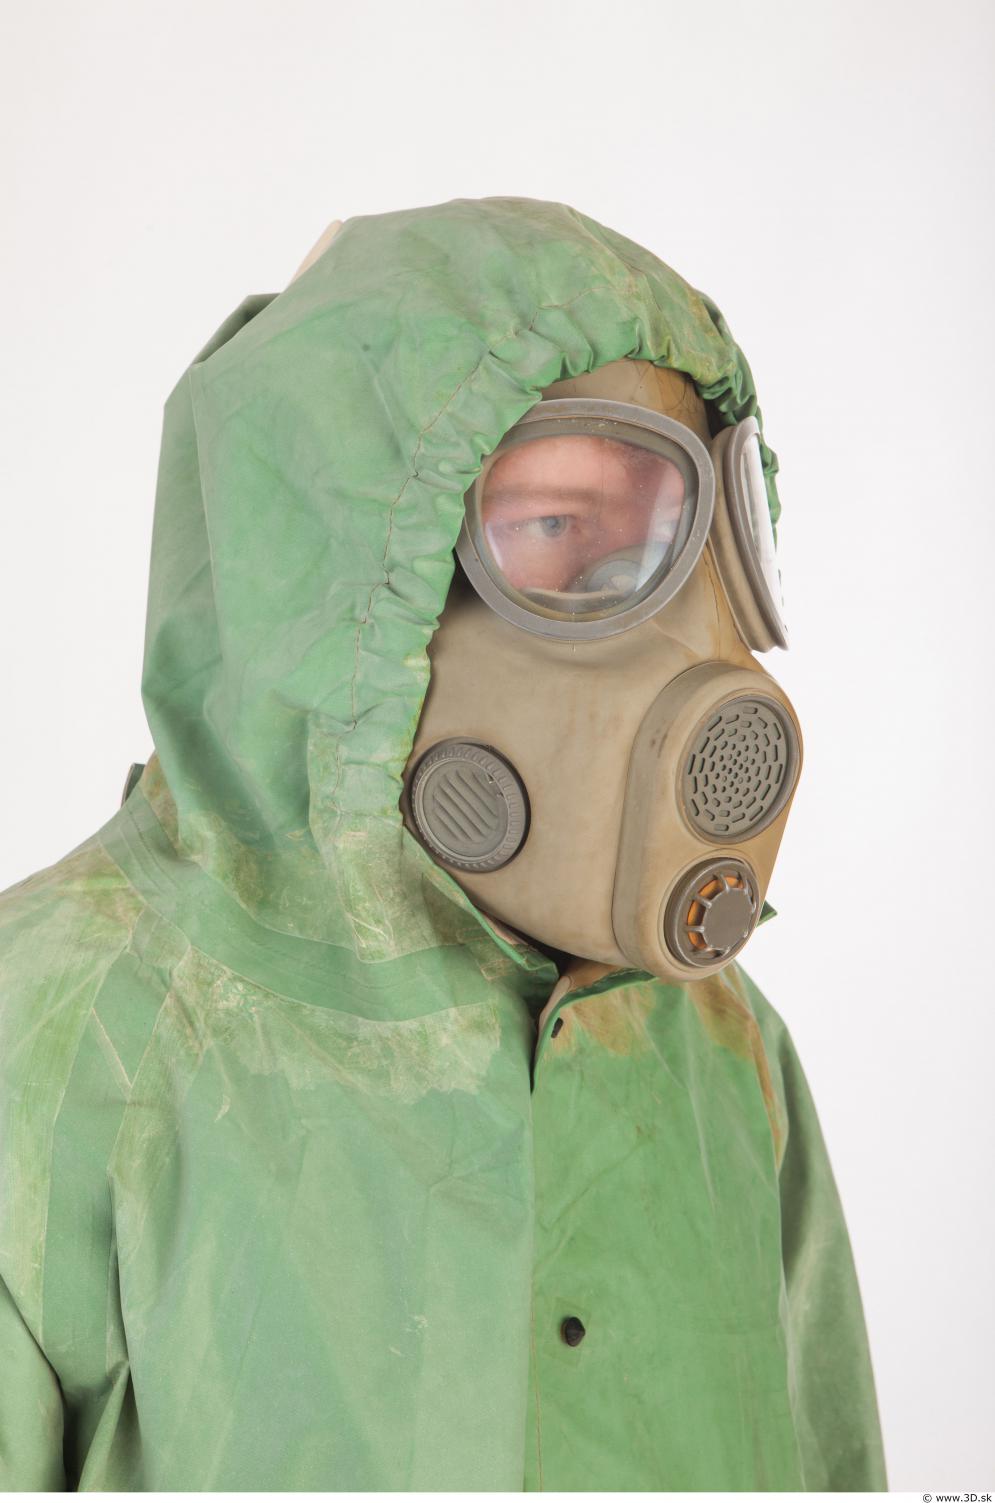 Image from Free Samples / May 2018 - 0059_nuclear_protective_cloth_0059.jpg